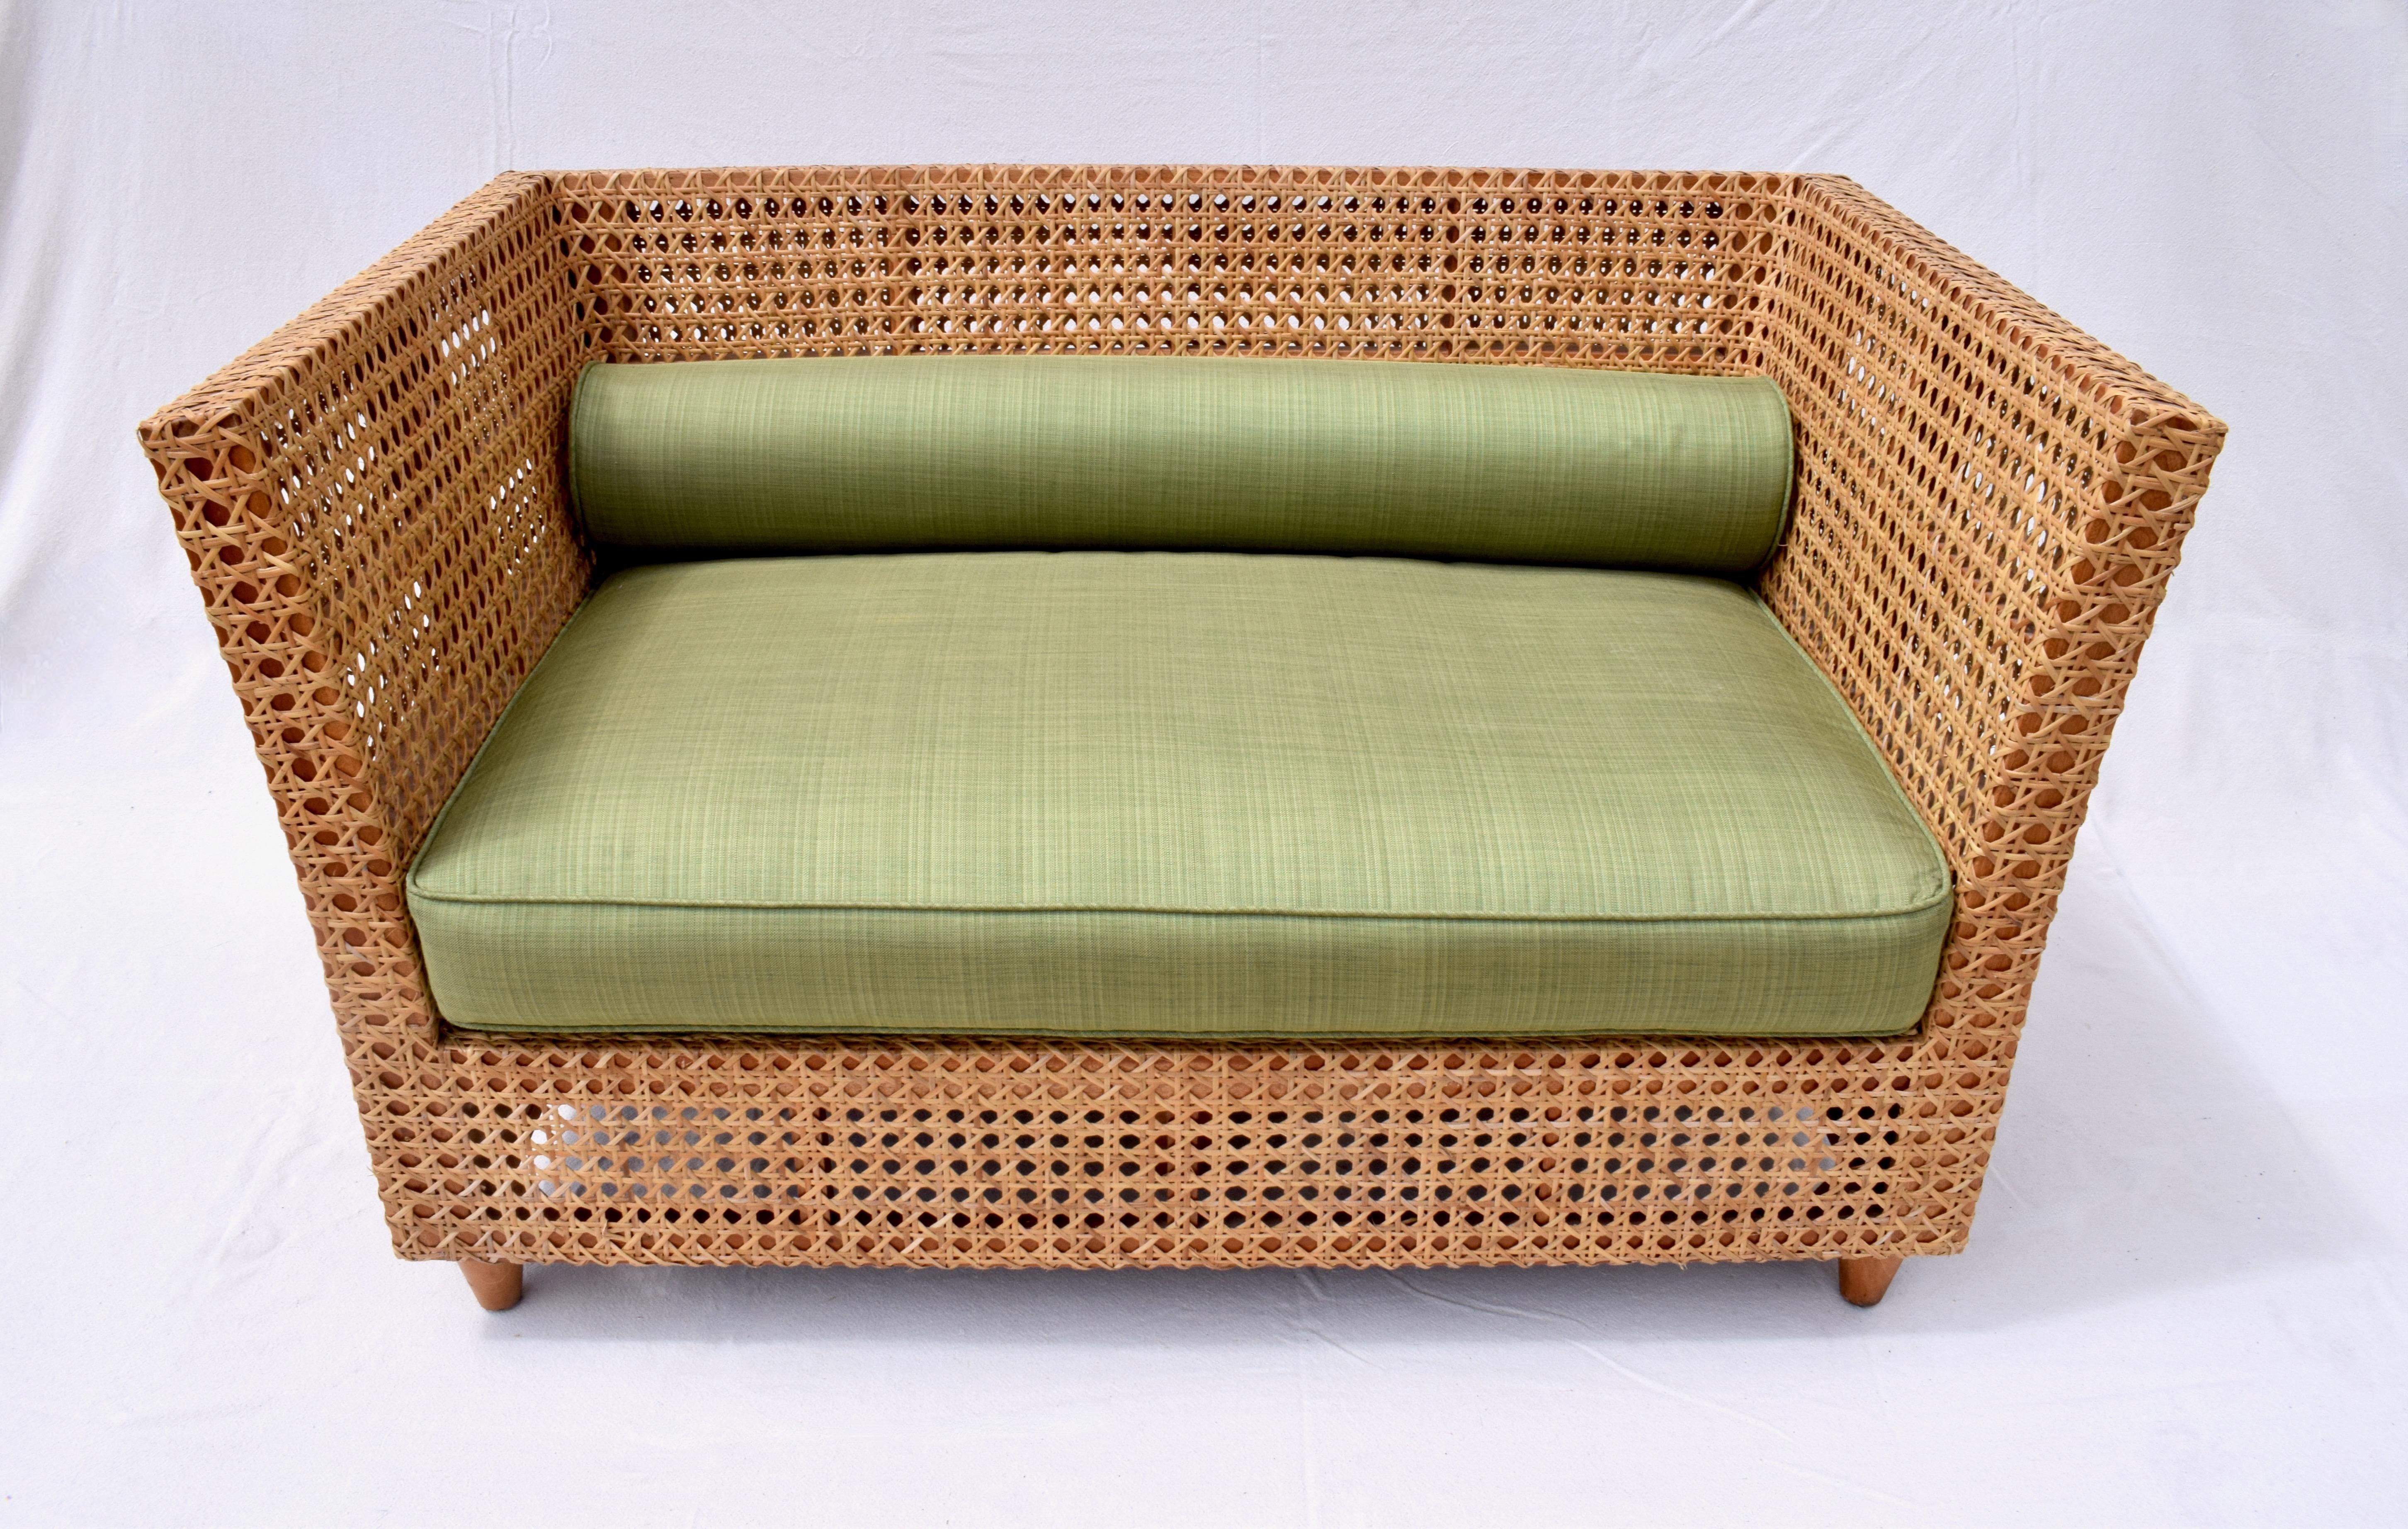 A solid Teak frame banquette settee with braided double cane work front & back newly upholstered in grass green Sunbrella fabric. Slightly splayed sides & wrap around cane portray the exquisite craftsmanship of this unique & substantial settee. Seat